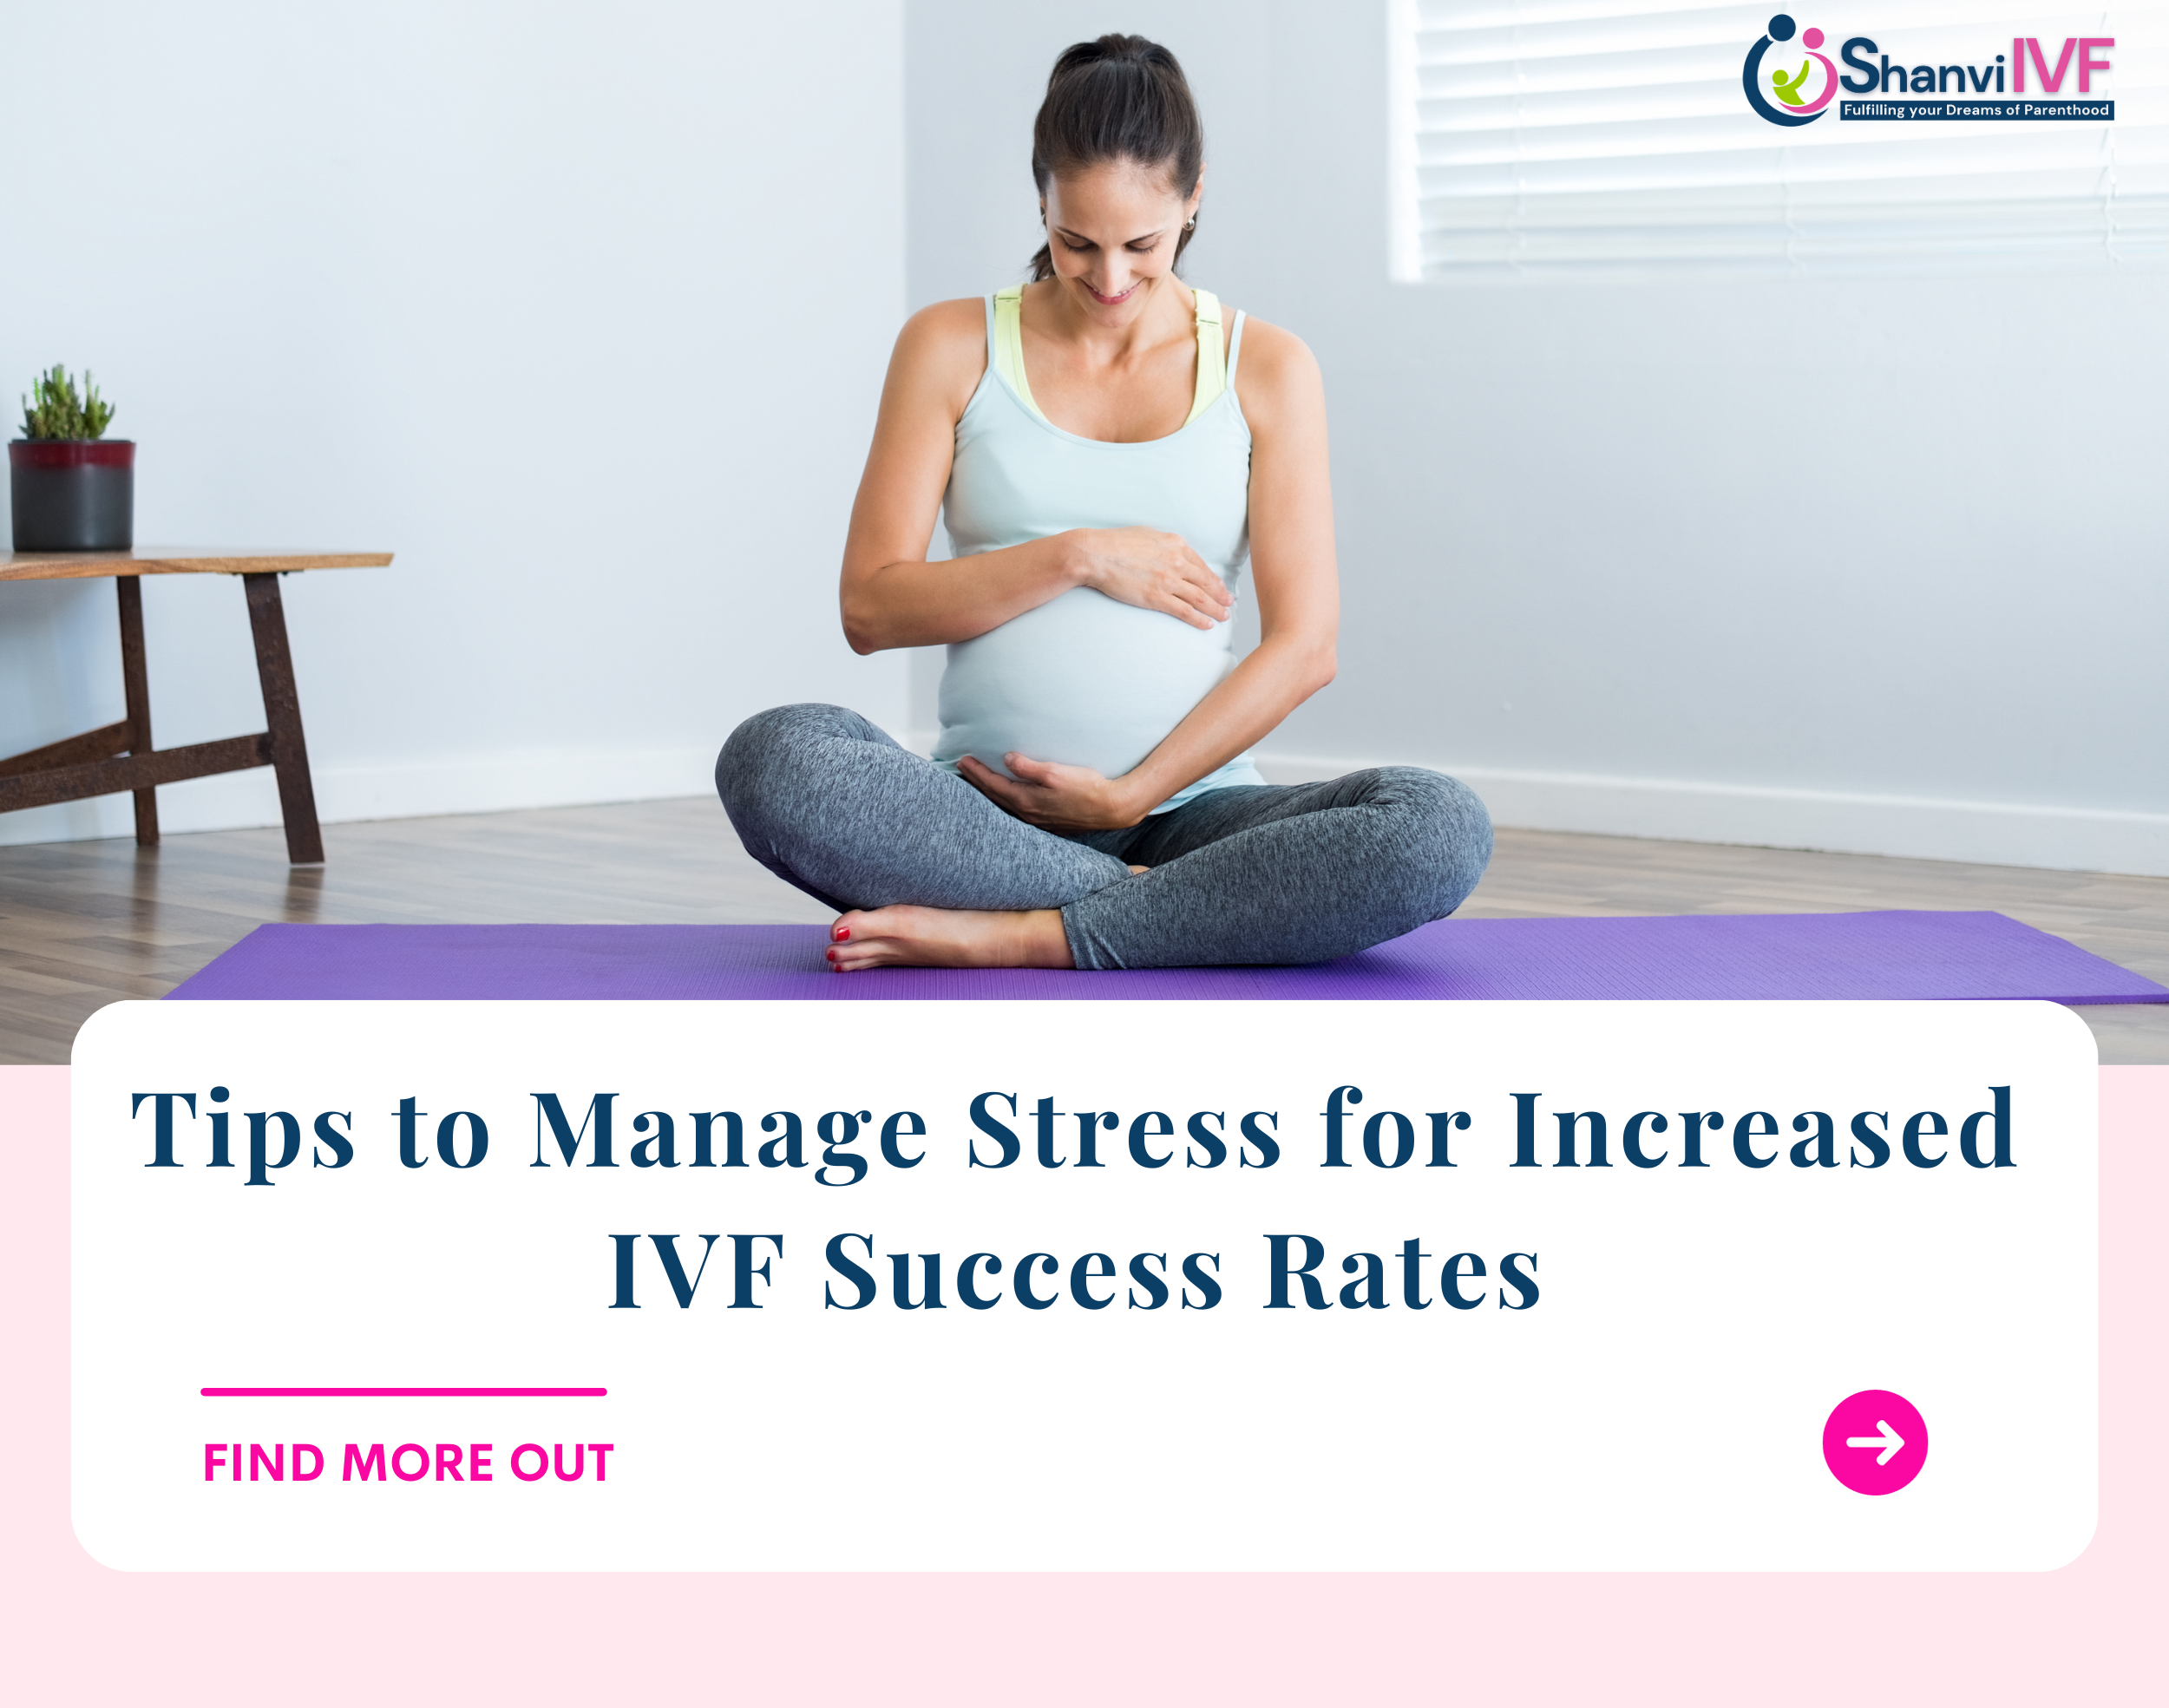 Tips to Manage Stress for Increased IVF Success Rates